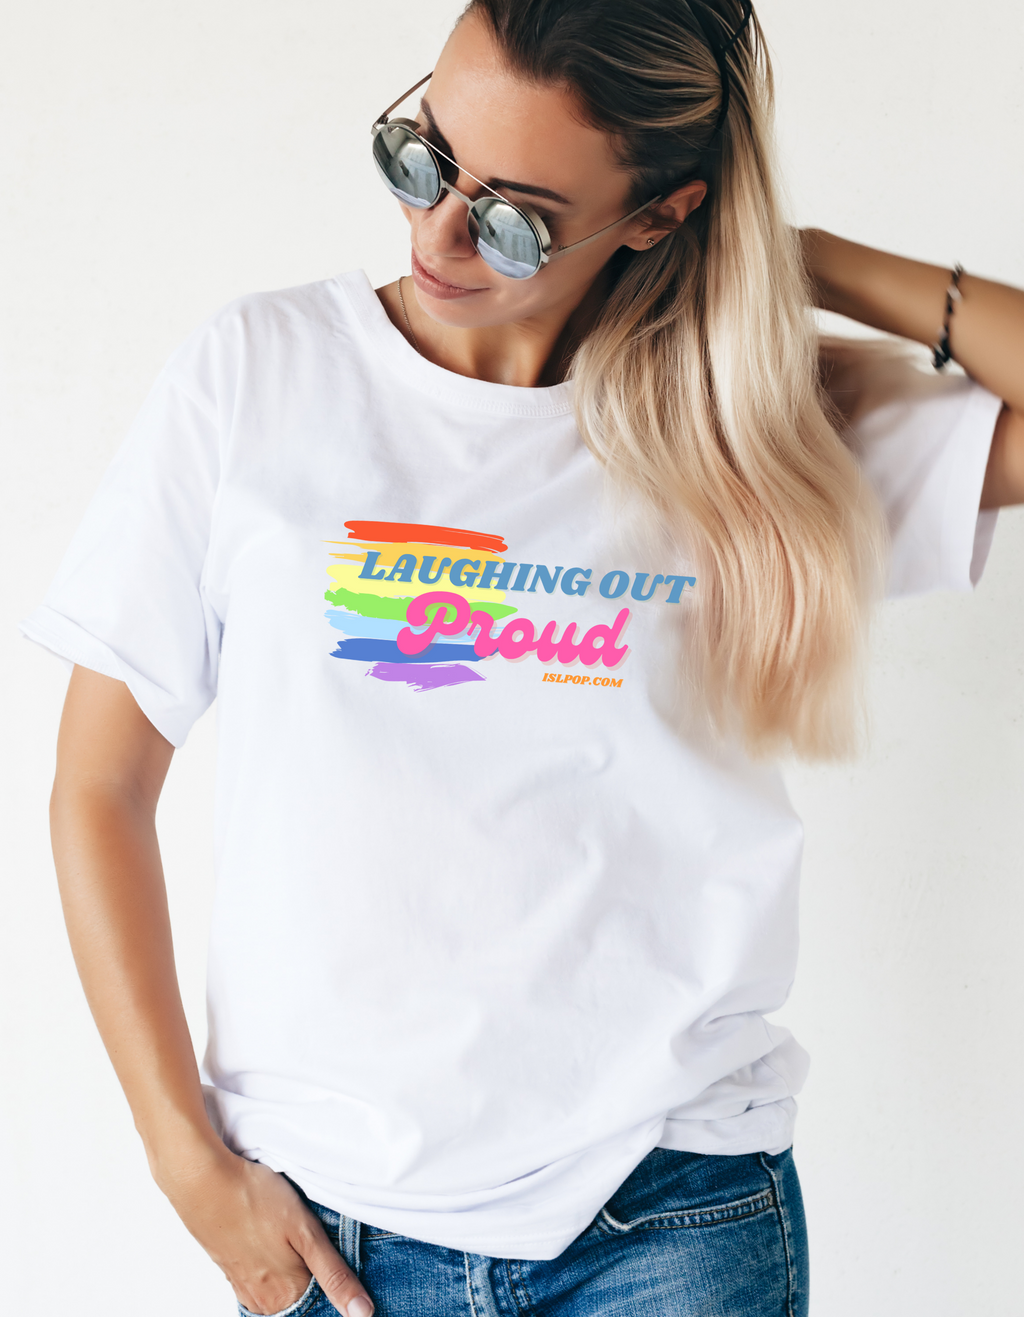 LAUGHING OUT PROUD Unisex Tee